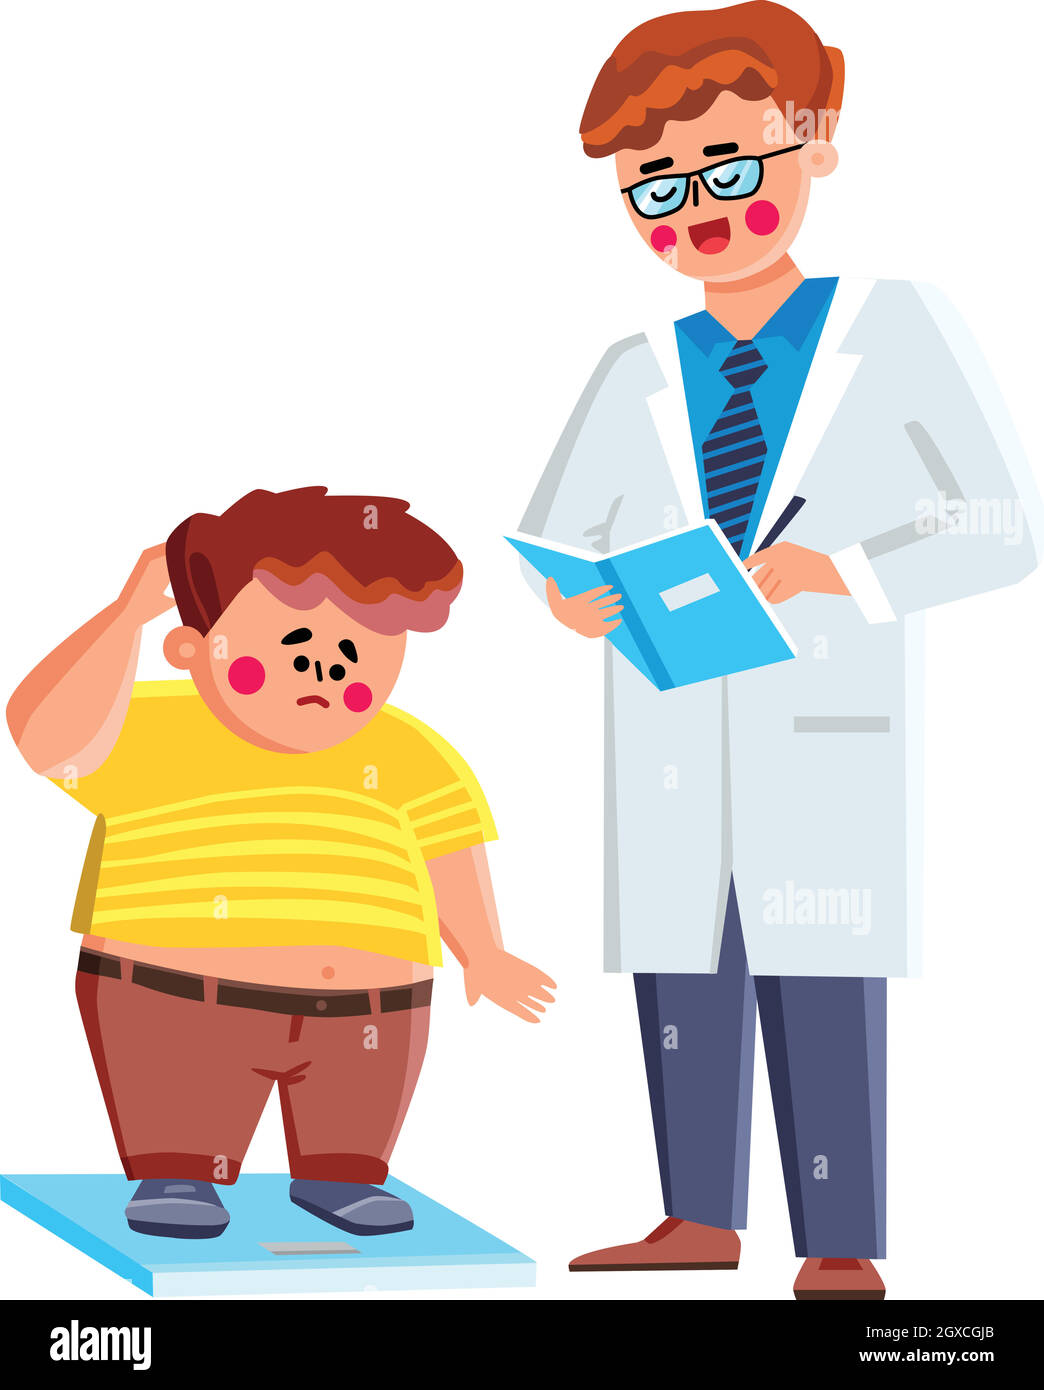 Obese Child Boy Consulting With Doctor Vector Stock Vector